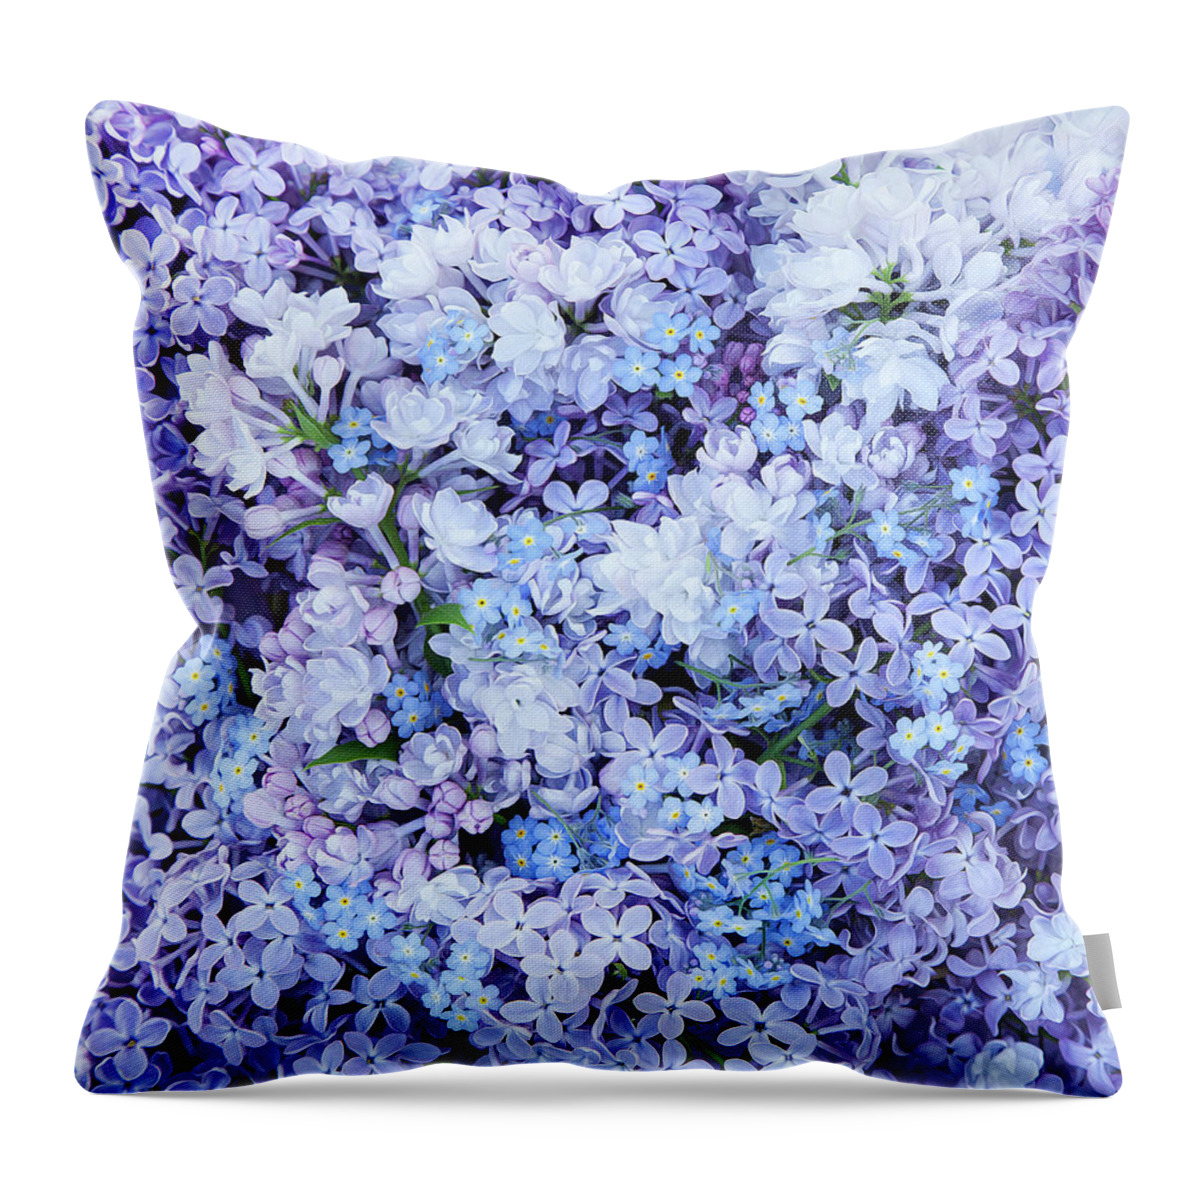 Face Mask Throw Pillow featuring the photograph Lilacs And Forget Me Nots by Theresa Tahara